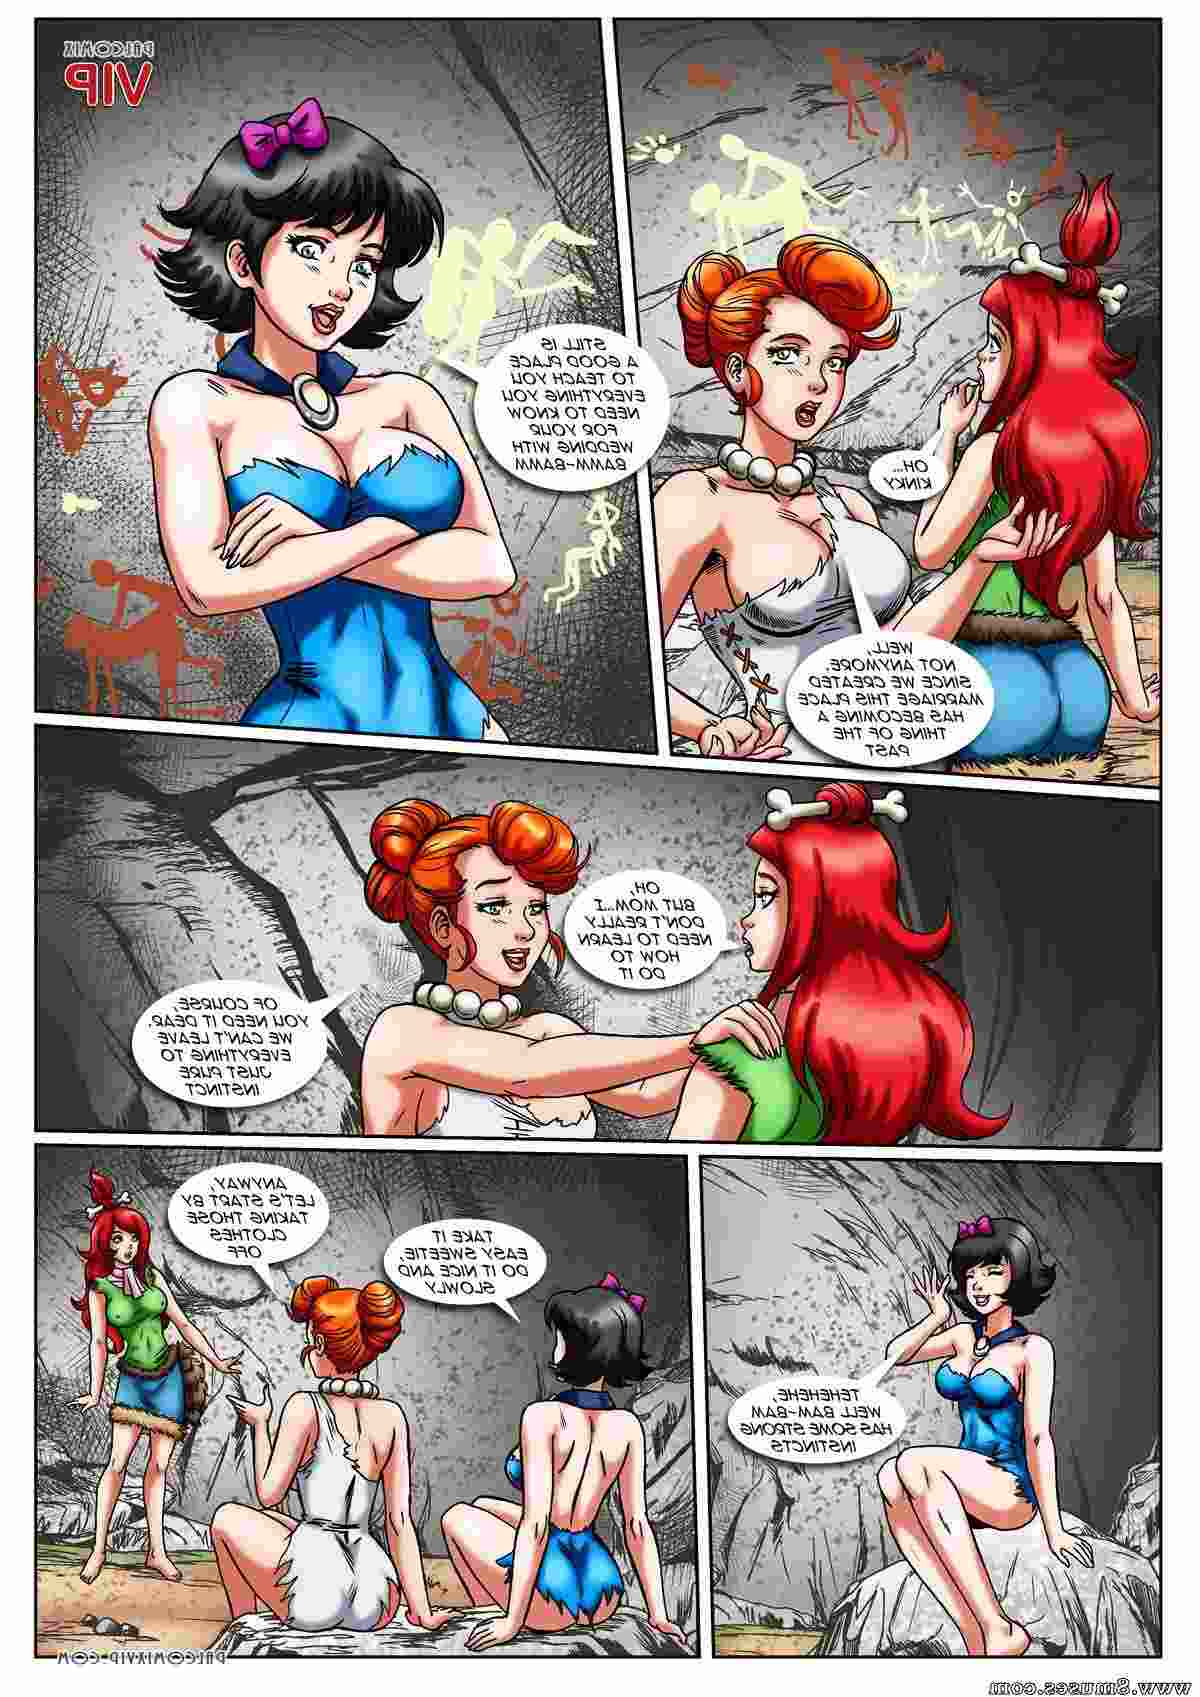 PalComix-Comics/Passing-the-Torch Passing_the_Torch__8muses_-_Sex_and_Porn_Comics_3.jpg